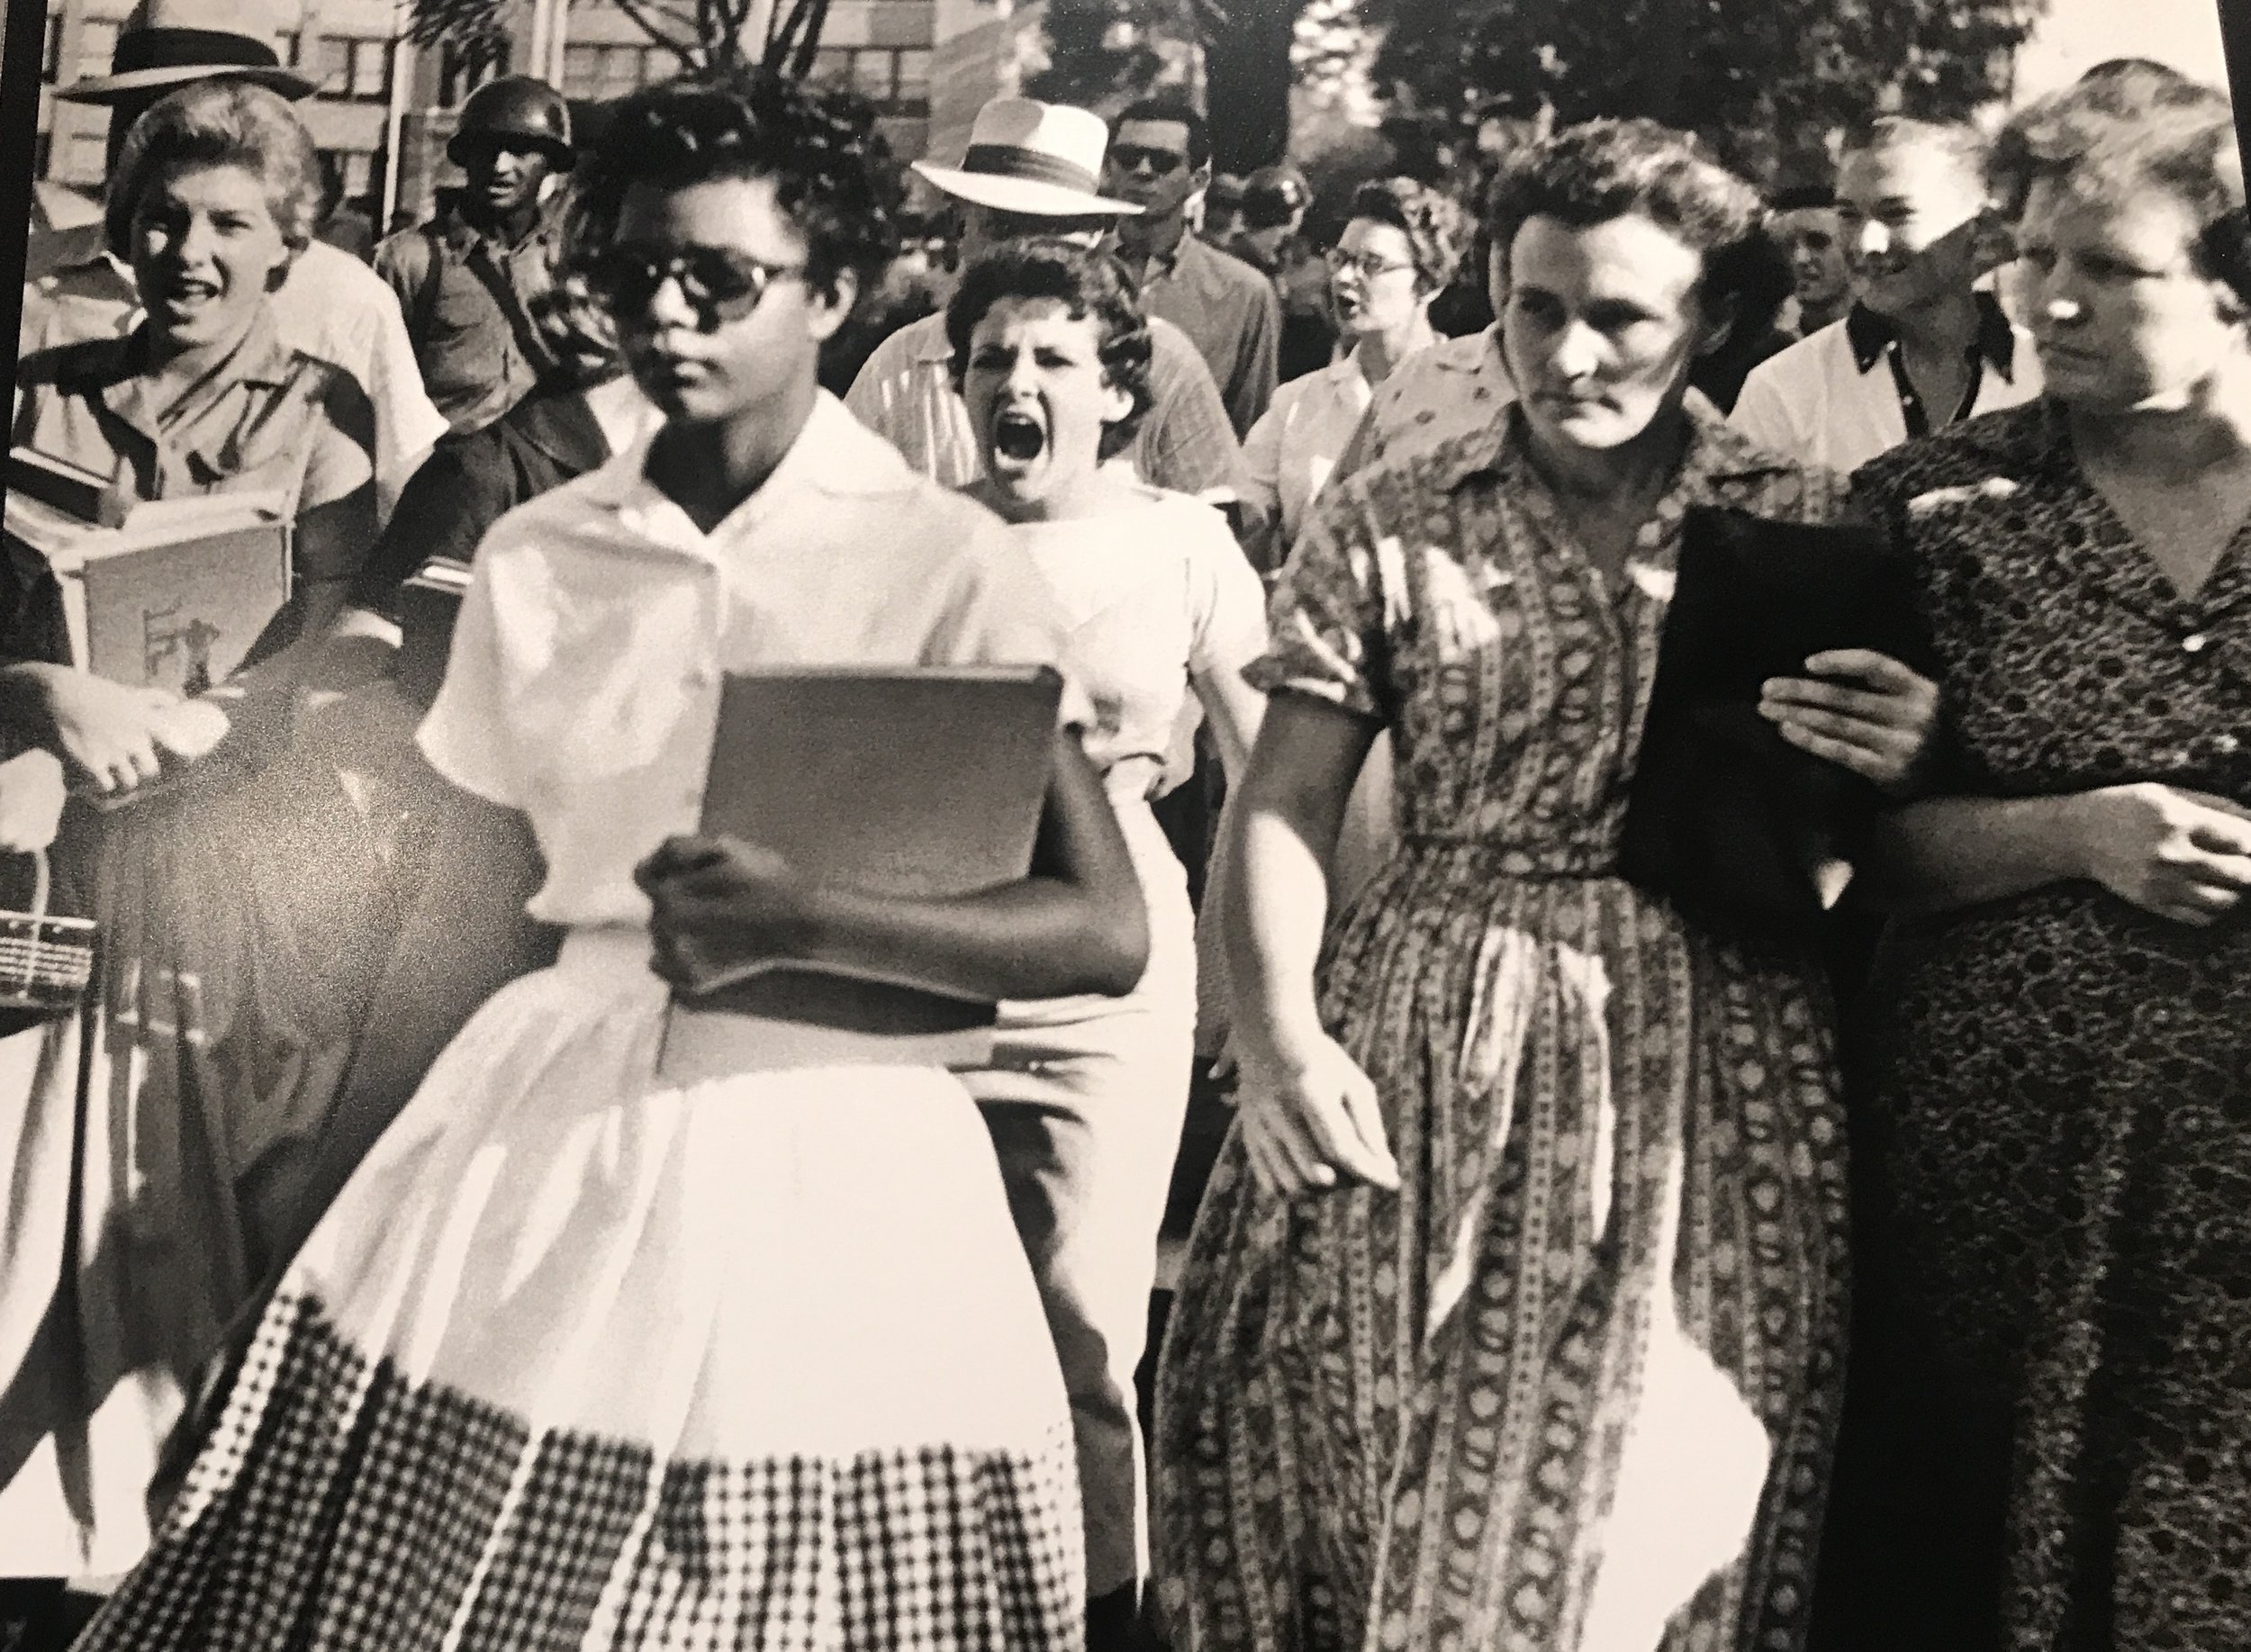  Images of angry crowds greeting the Little Rock Nine as they showed up for school shocked much of the nation. 